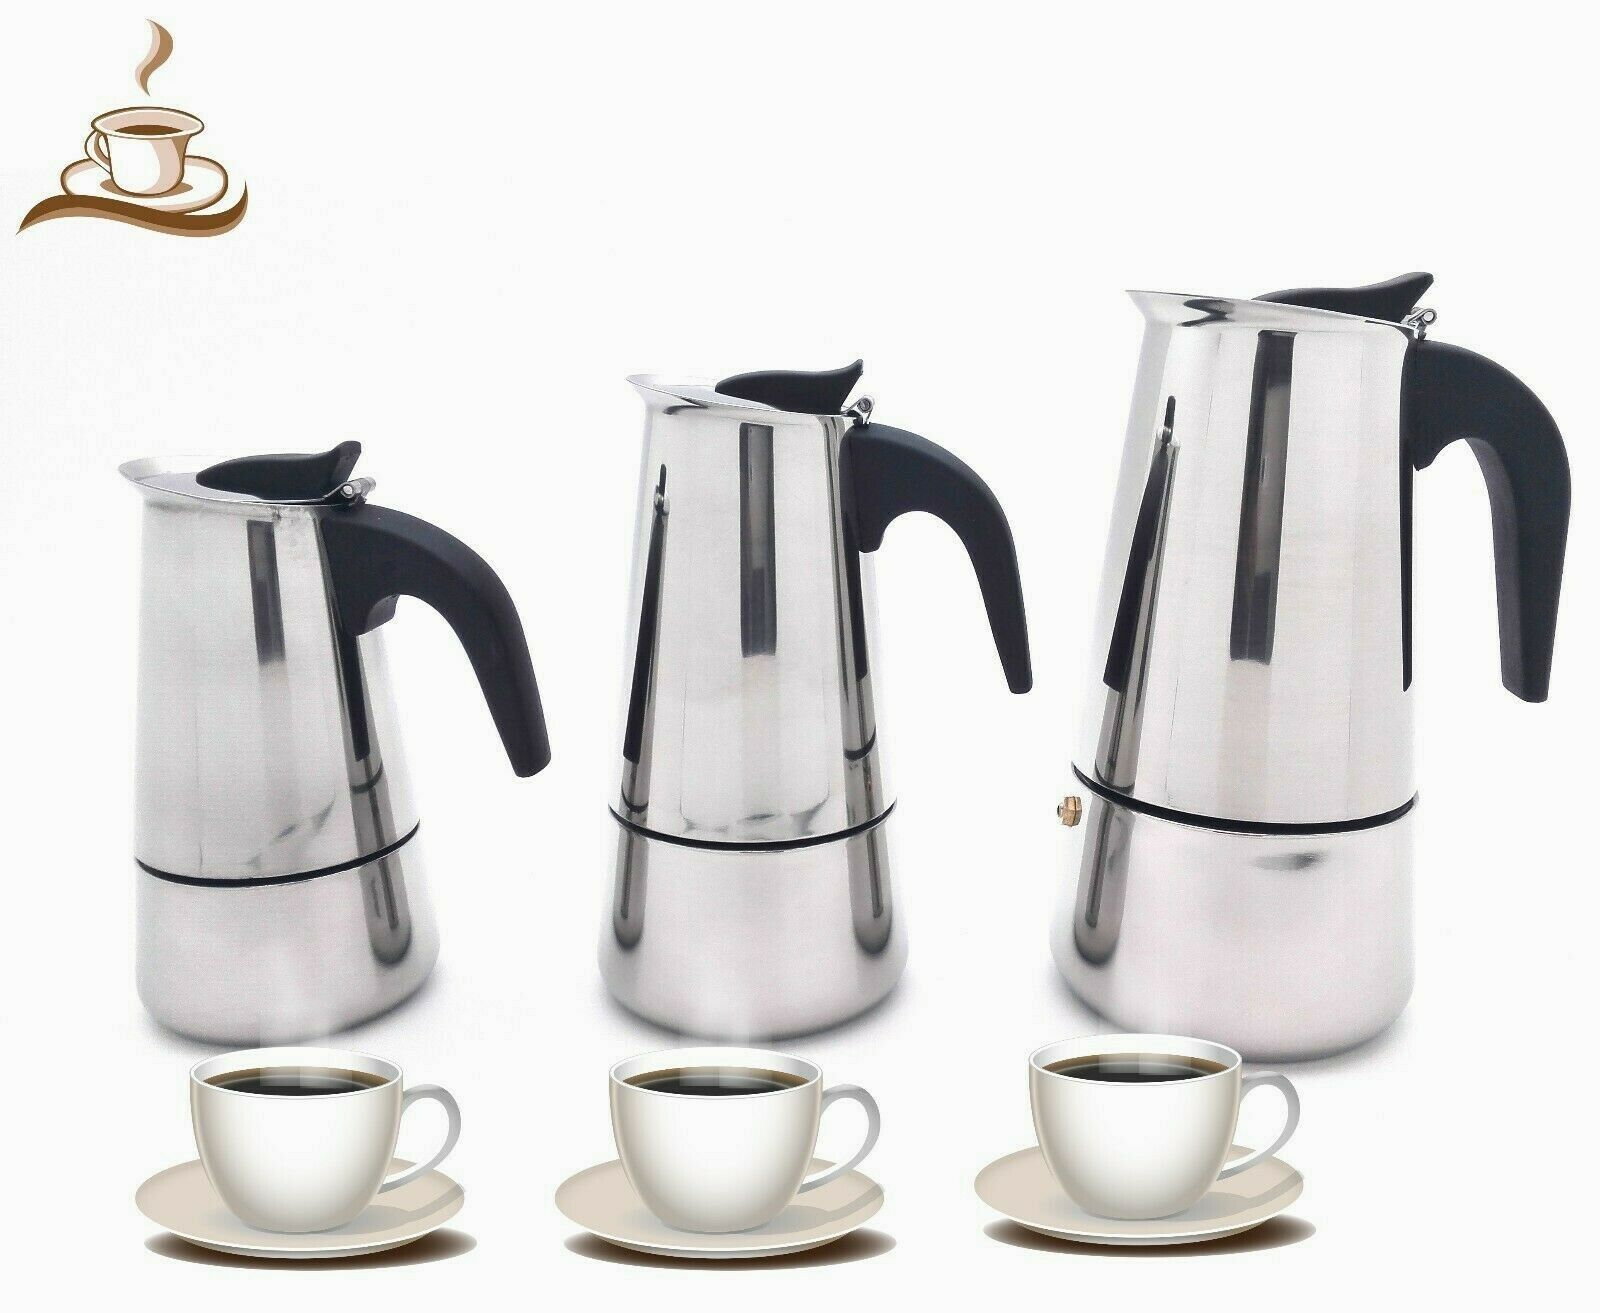 Espresso Coffee Maker Stainless Steel Coffee Maker Stove Top Safe 9/6/4 Cups